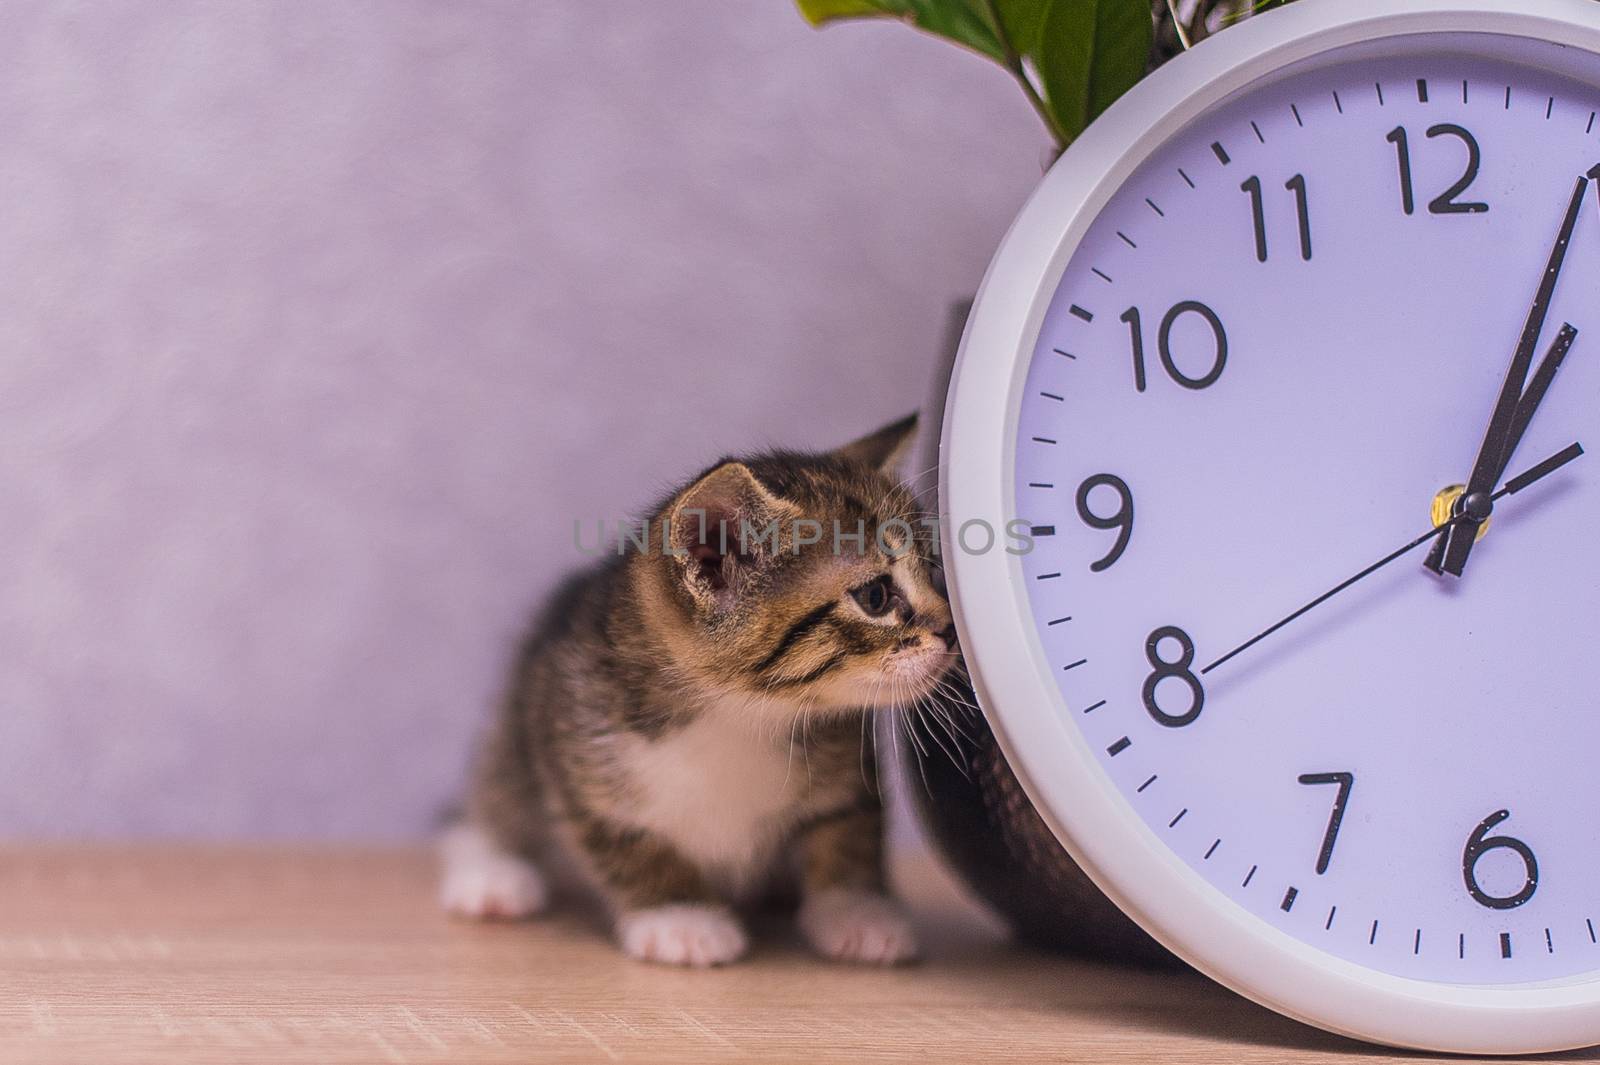 striped kitten sniffs a clock on a wooden table by chernobrovin